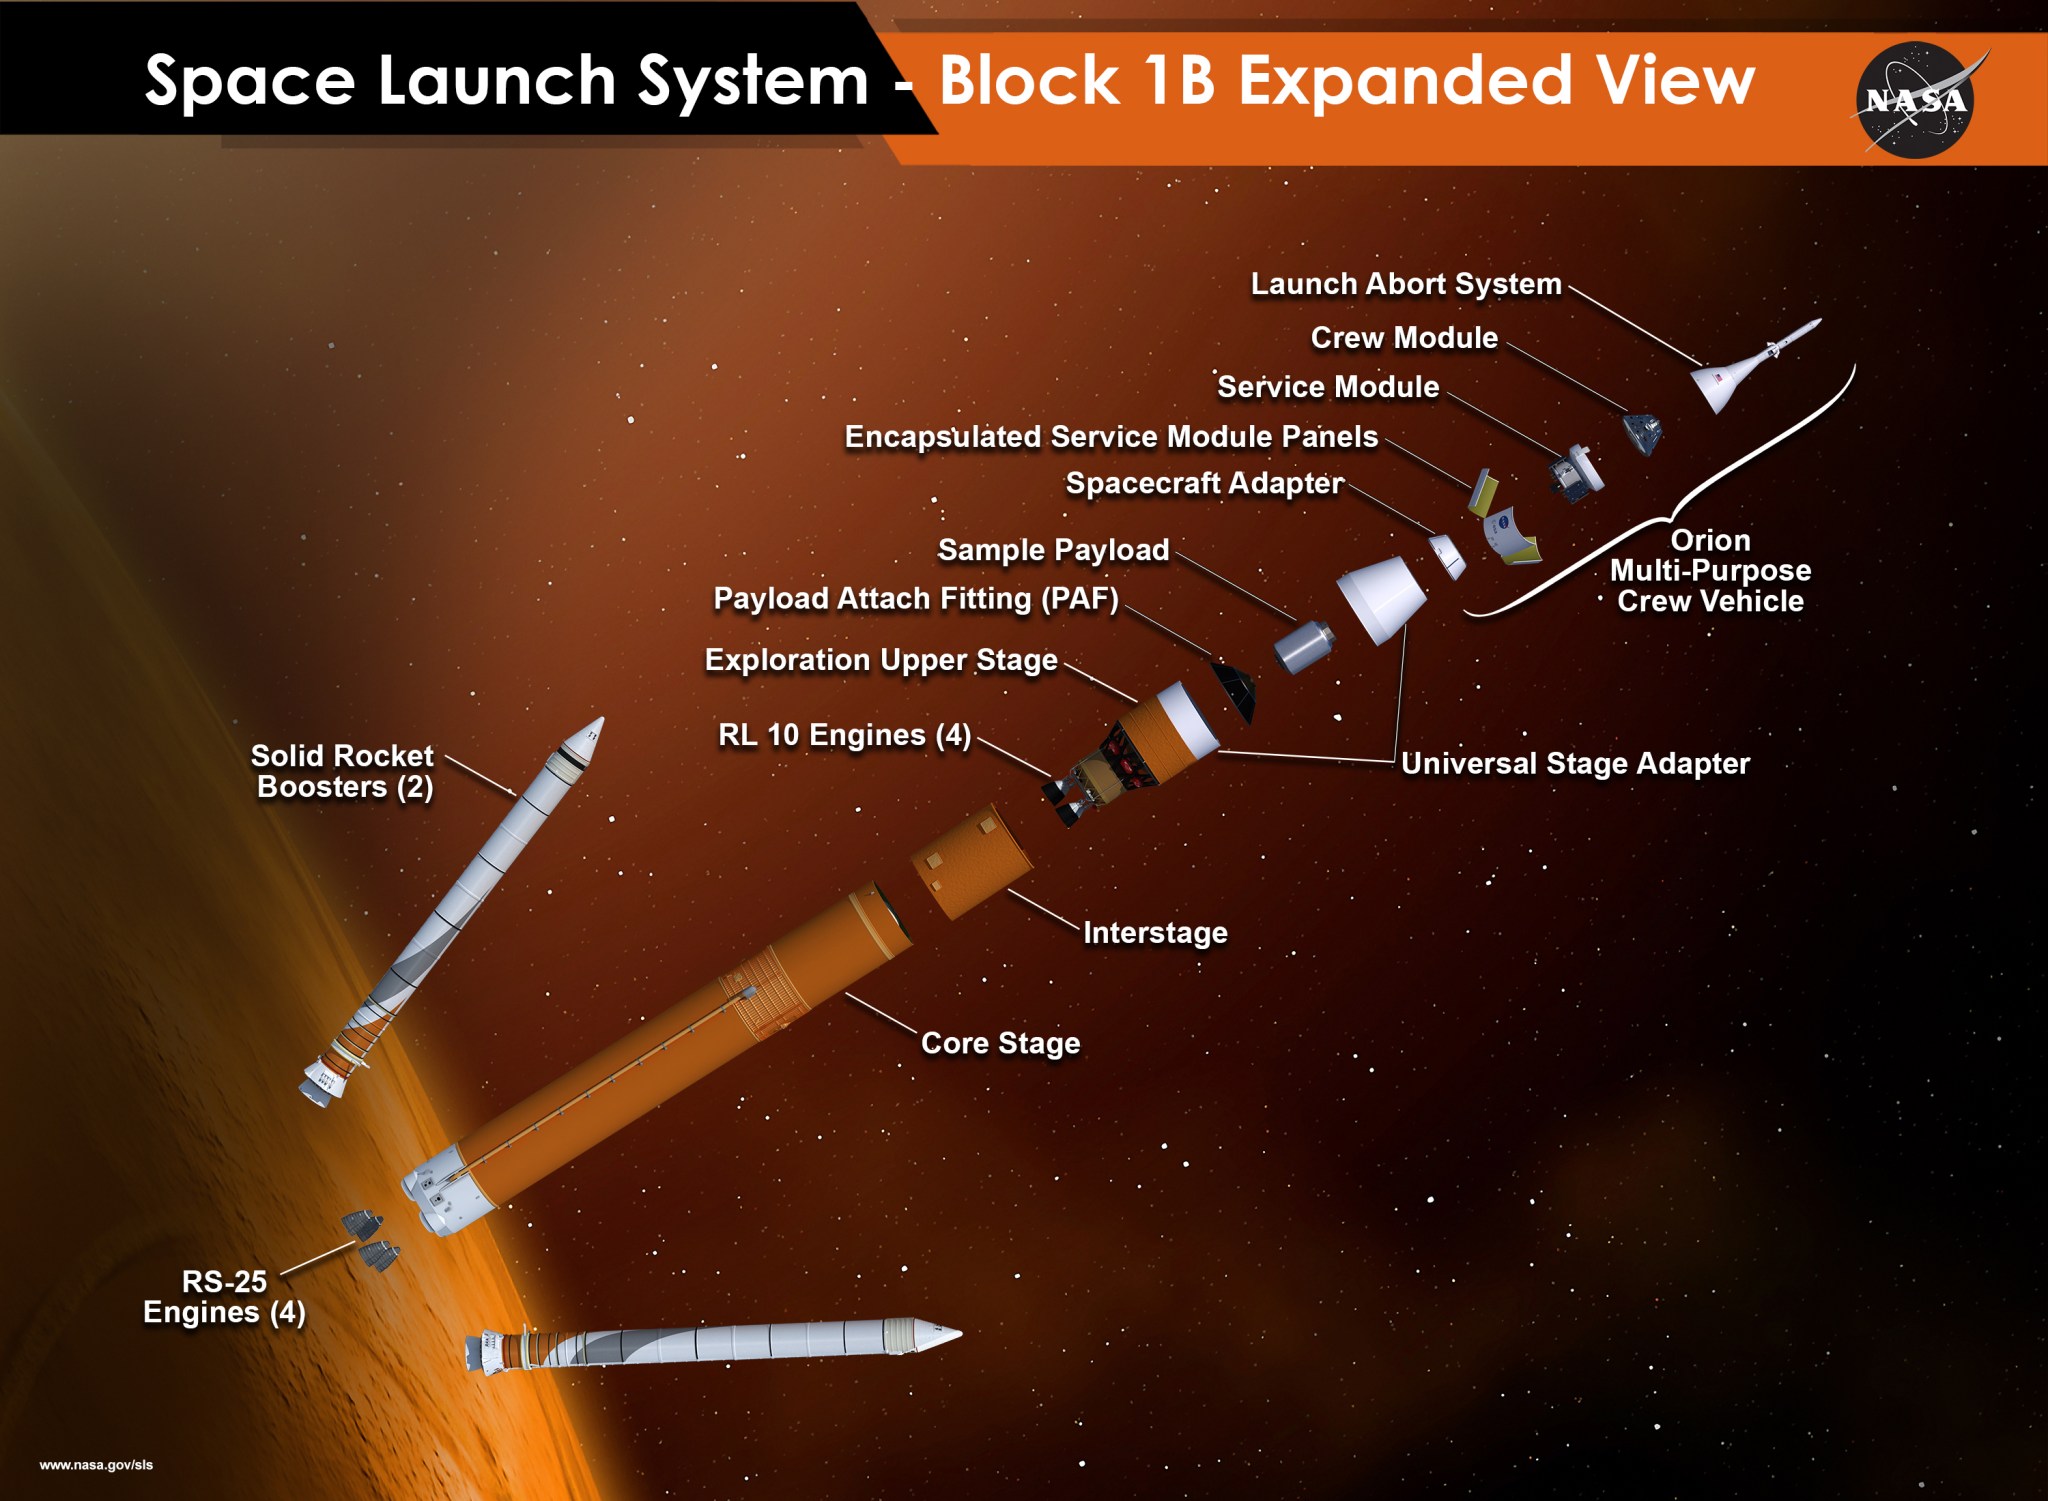 An expanded view of the Block IB configuration of NASA's Space Launch System rocket, including the four RL10 engines.